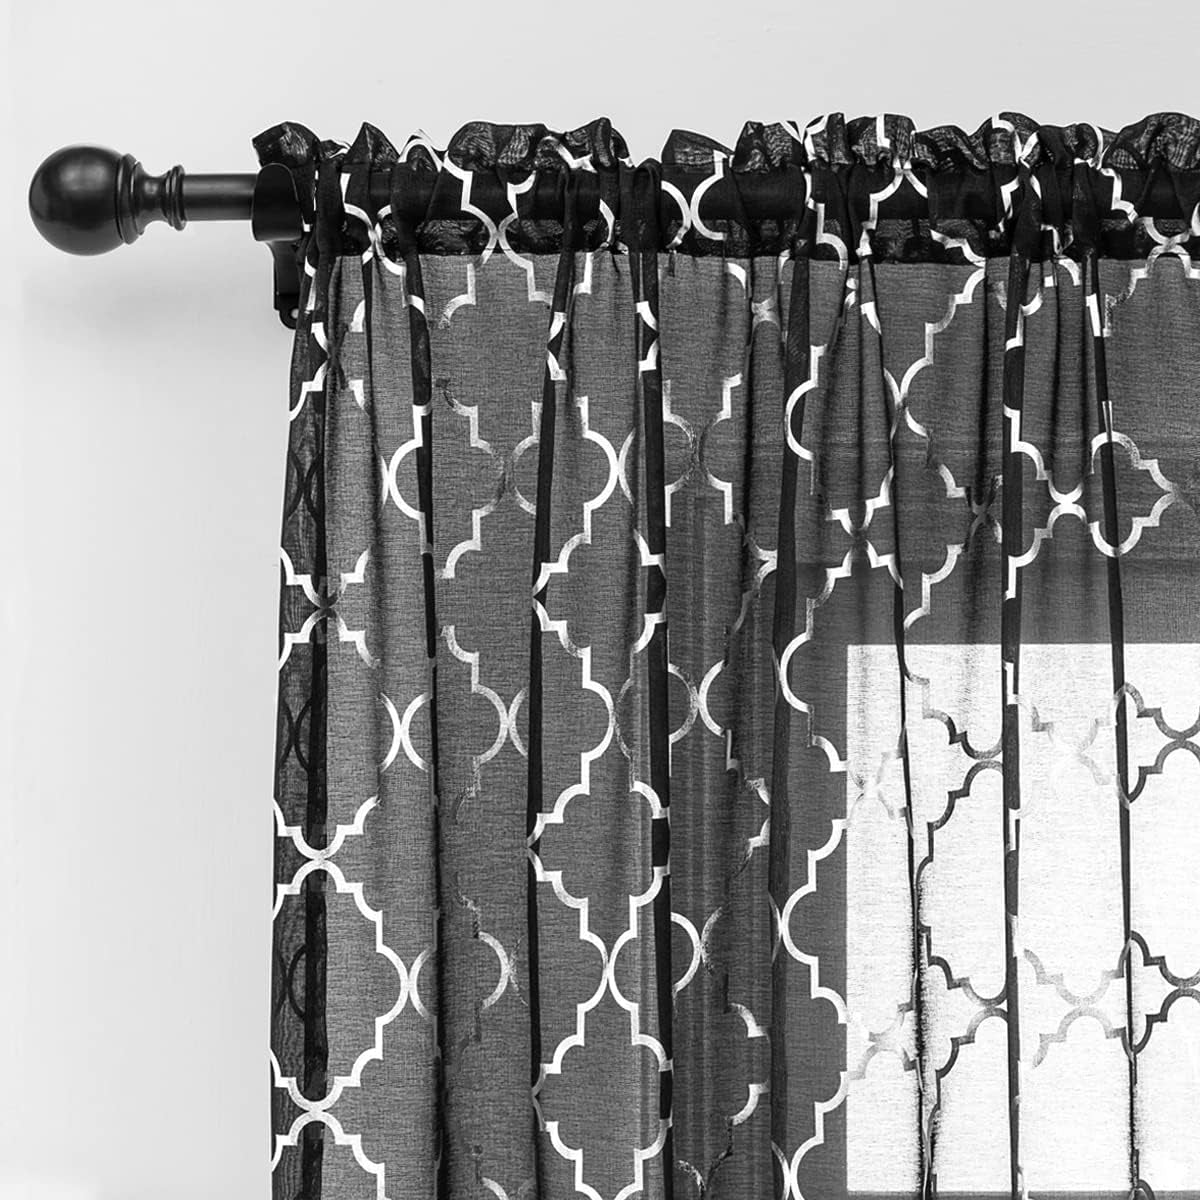 Kotile Silver Grey Sheer Curtains 96 Inch - Metallic Silver Foil Moroccan Tile Printed Rod Pocket Privacy Light Filtering Curtains for Living Room, 52 X 96 Inches, 2 Panels, Grey and Silver  Kotile Textile Black Silver W52" X L84" 